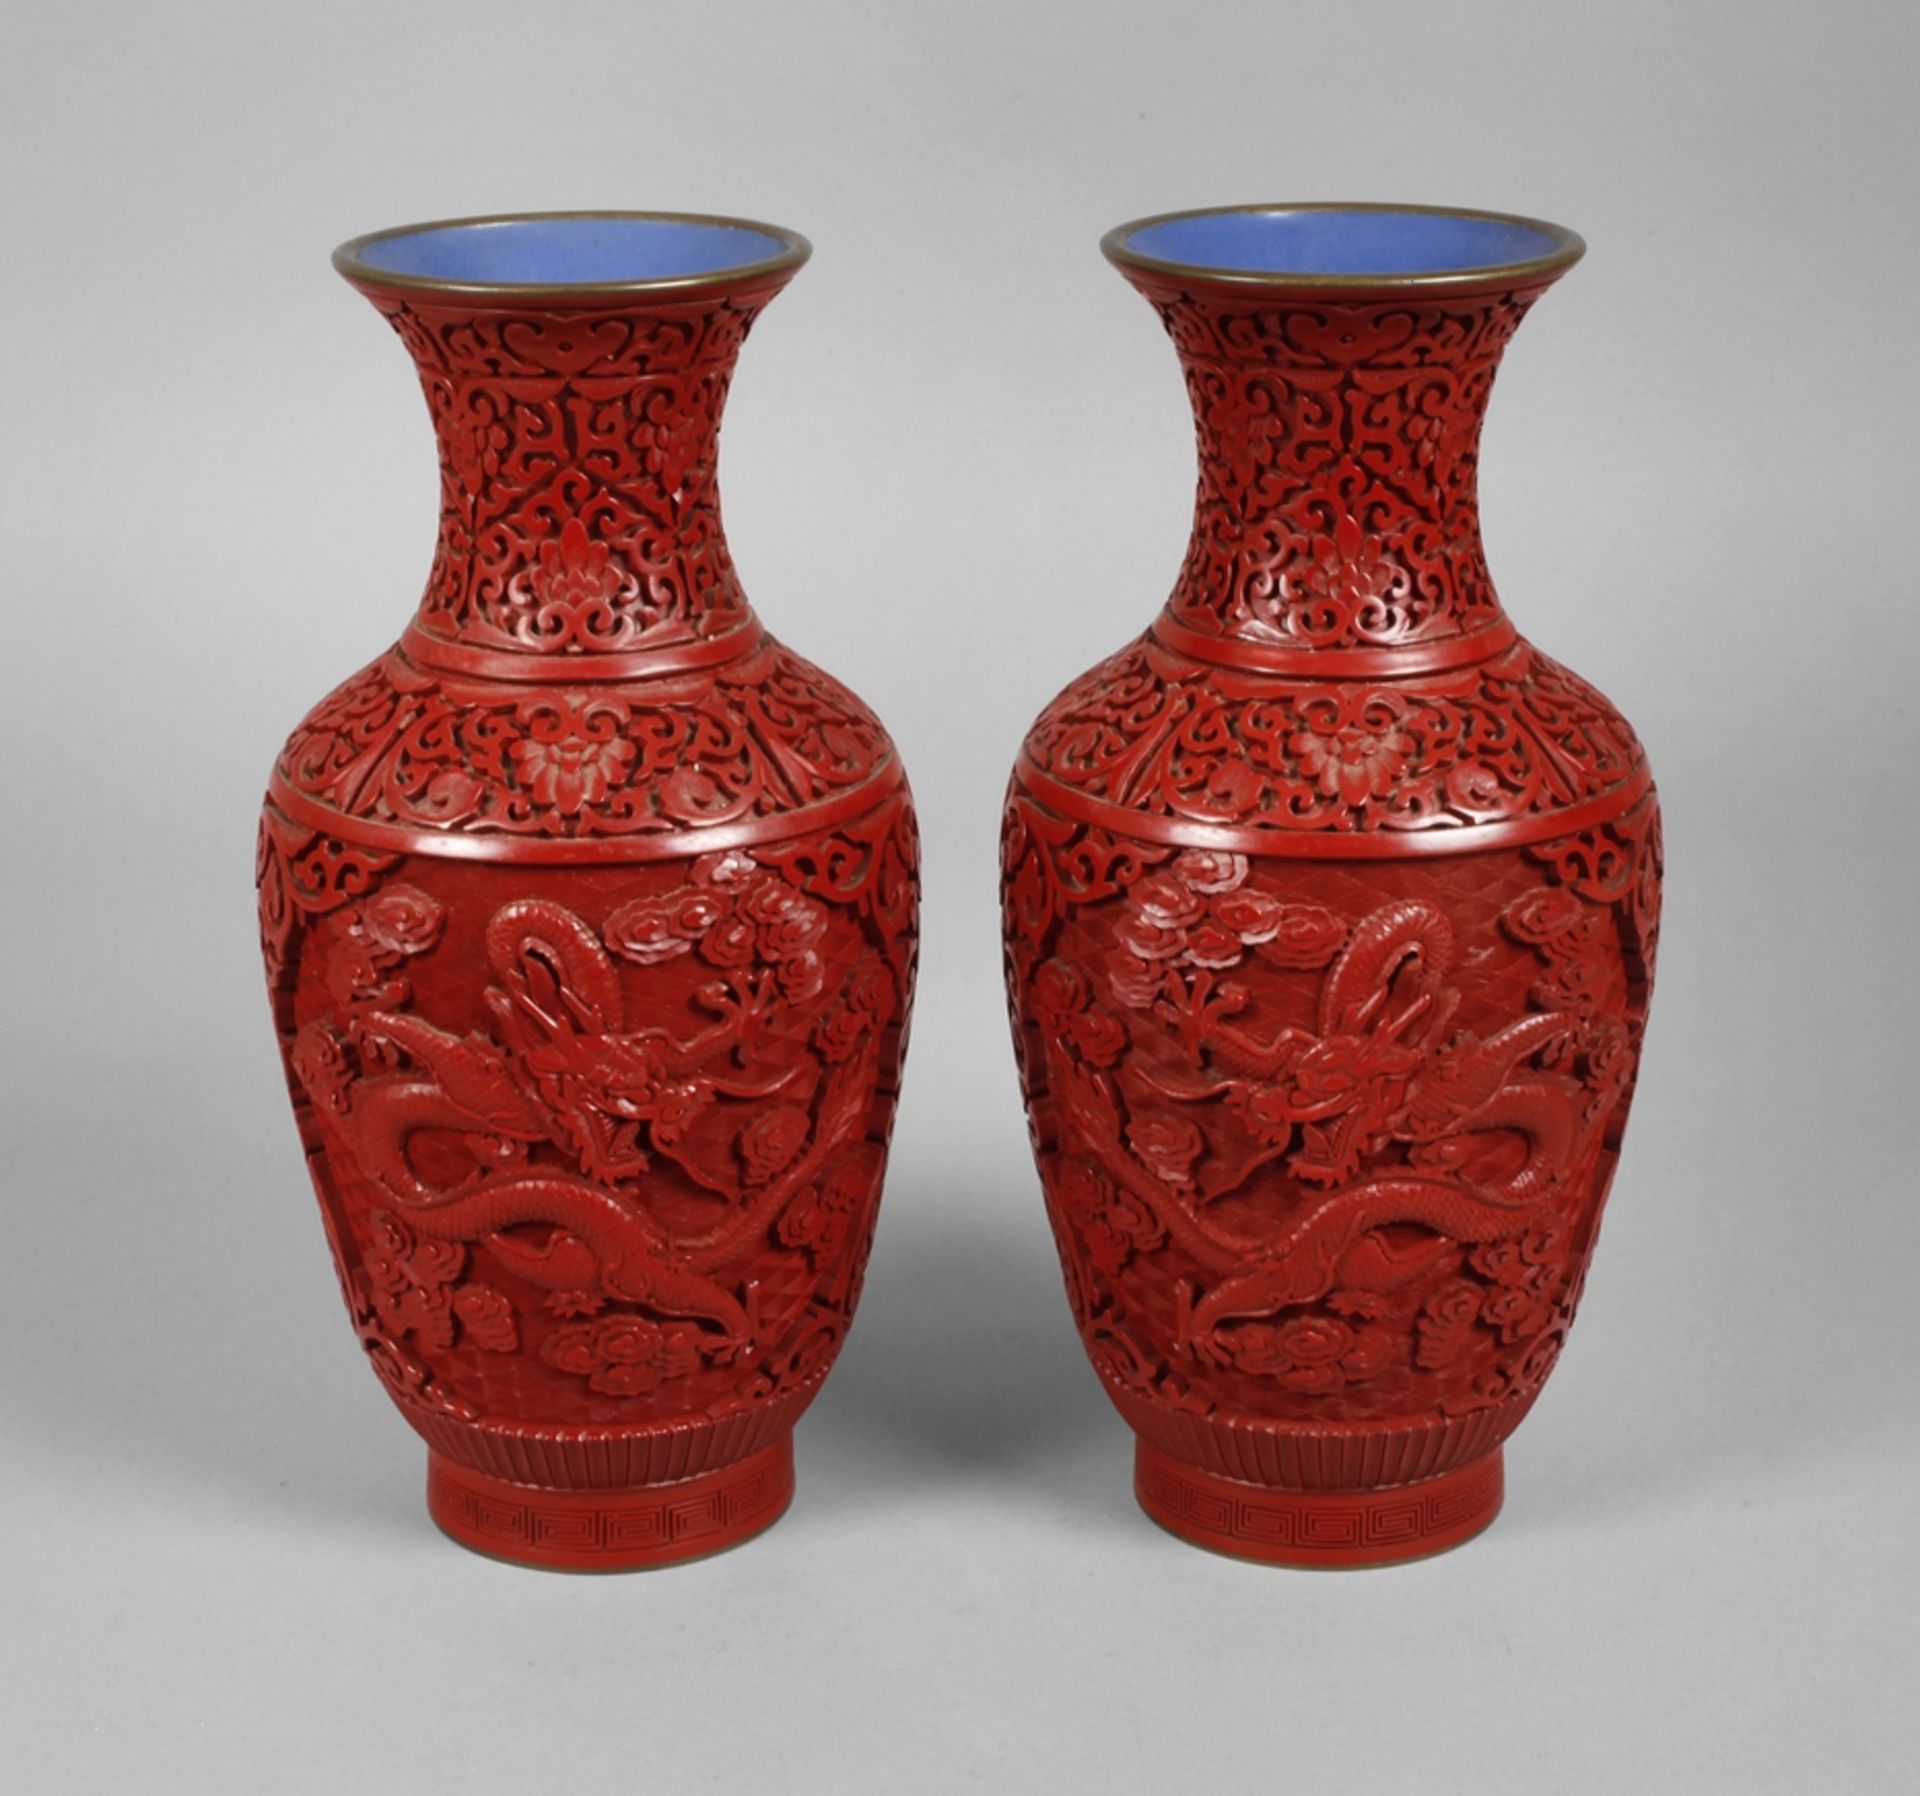 Pair of vases, lacquer carving